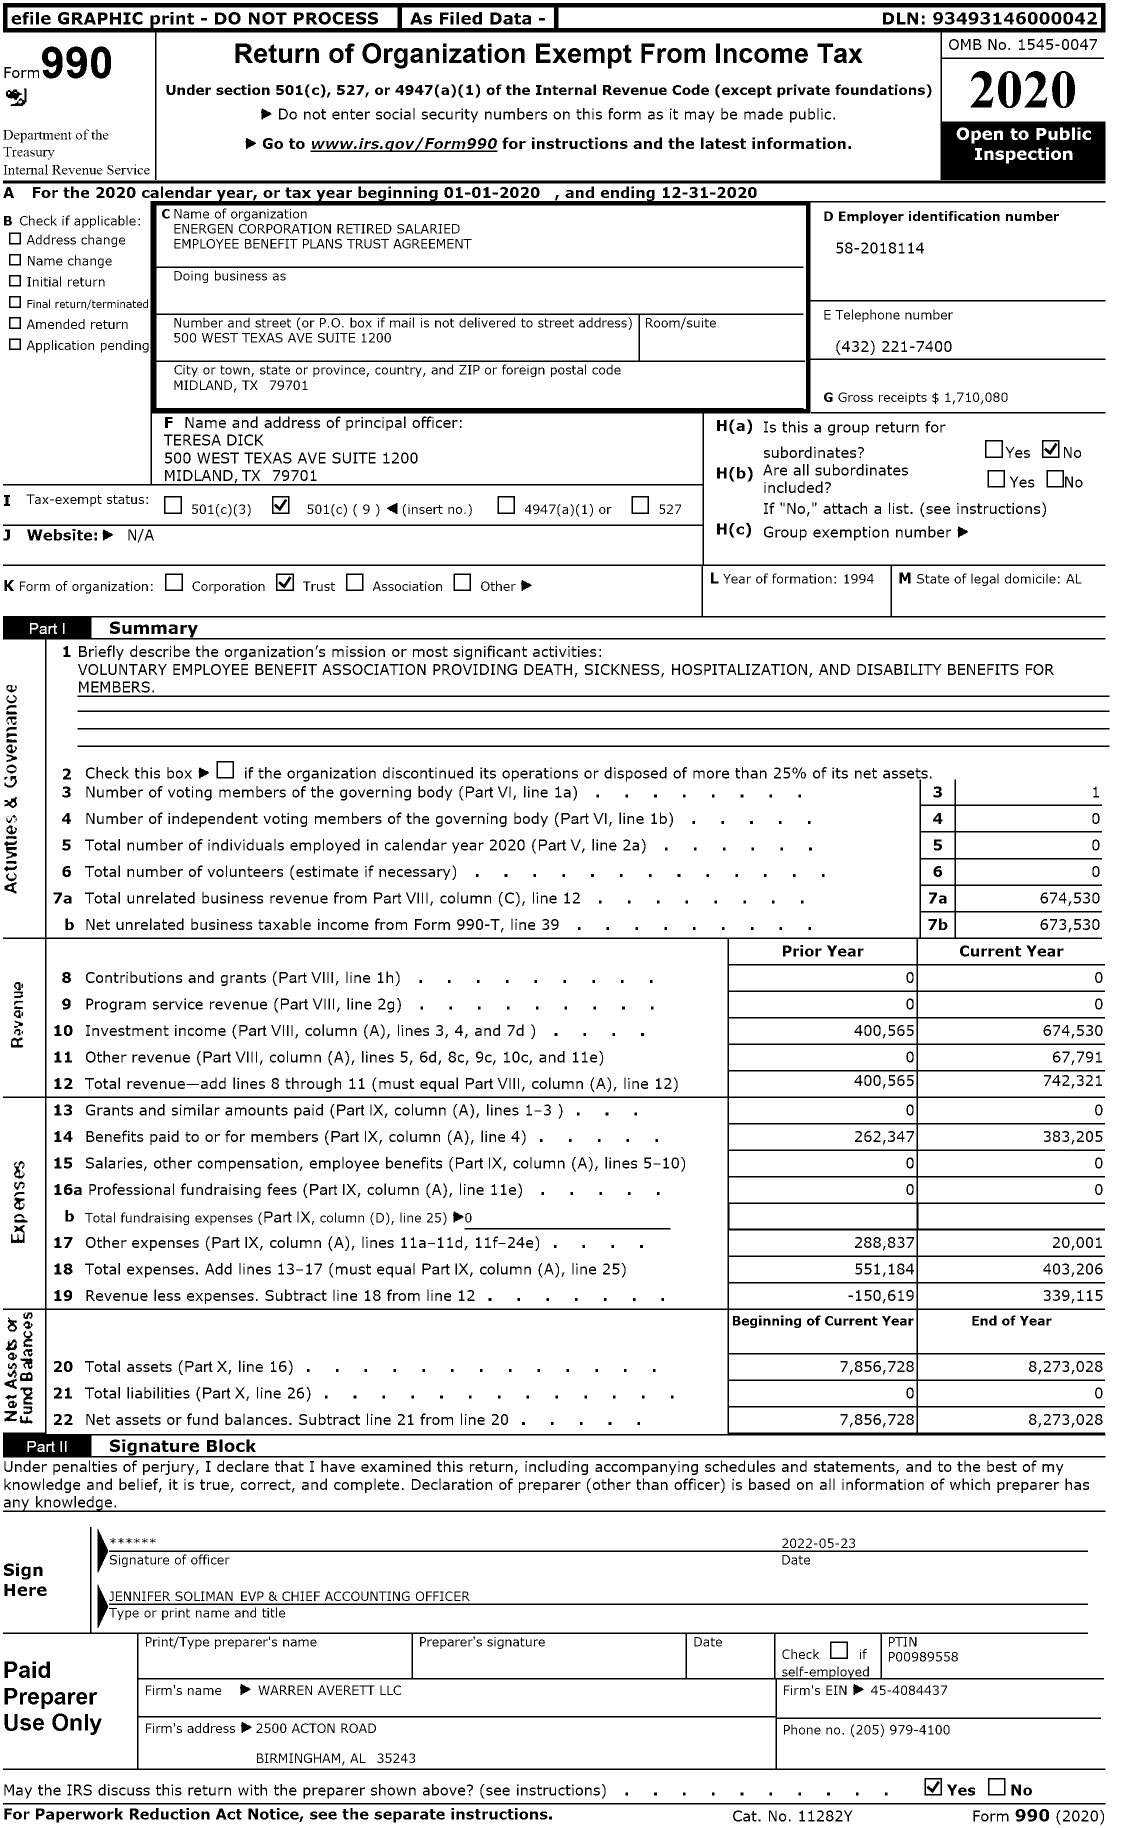 Image of first page of 2020 Form 990O for Energen Corporation Retired Salaried Employee Benefit Plans Trust Agreement